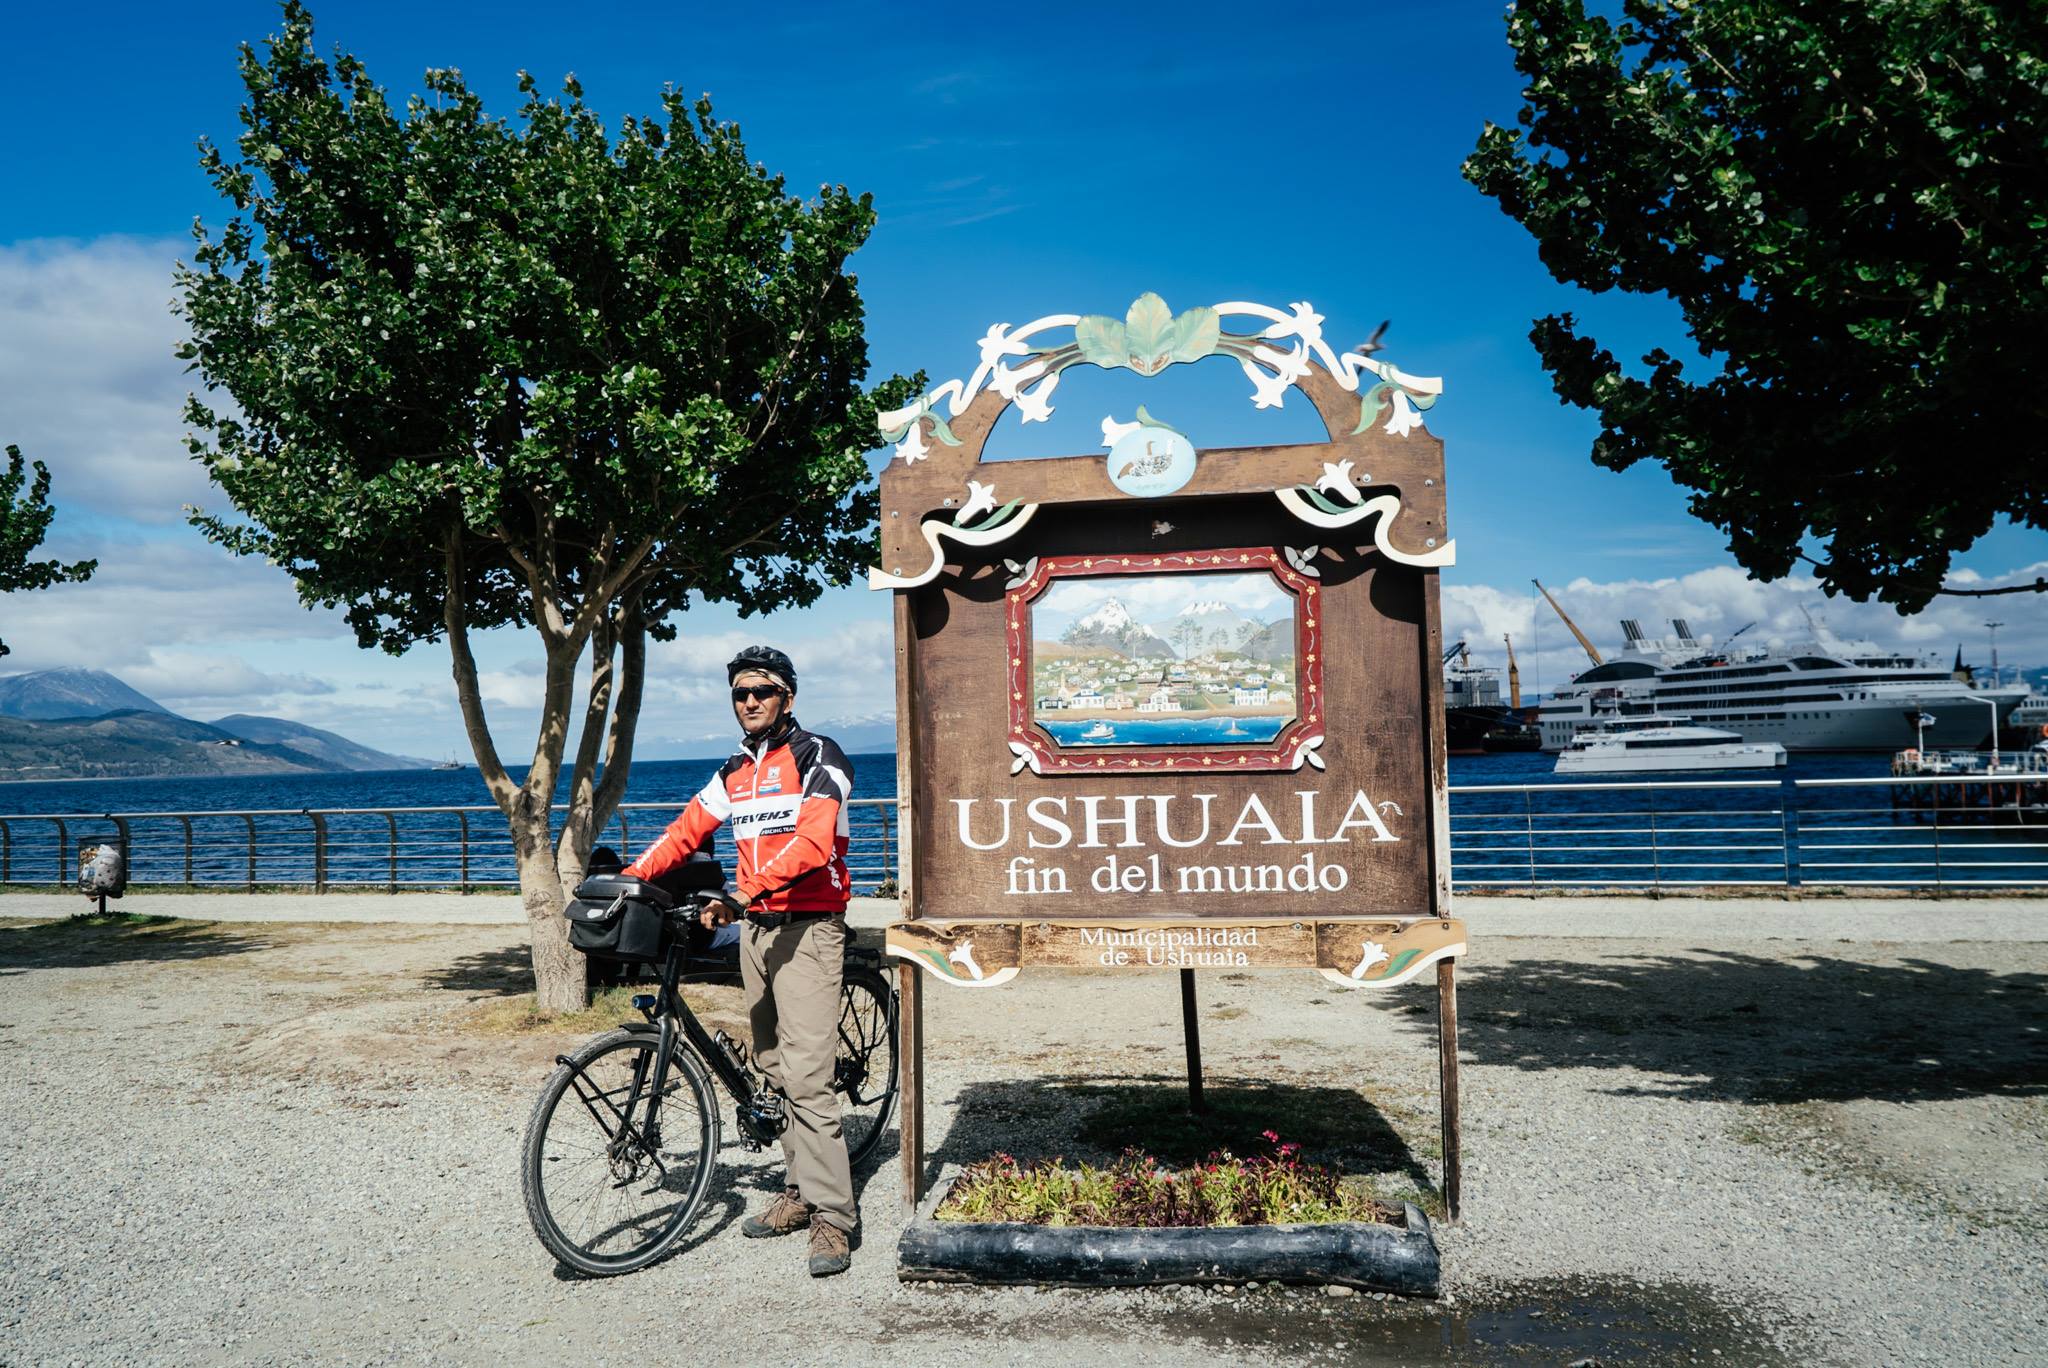 Starting my 26,000 km long journey in Ushuaia, Argentina